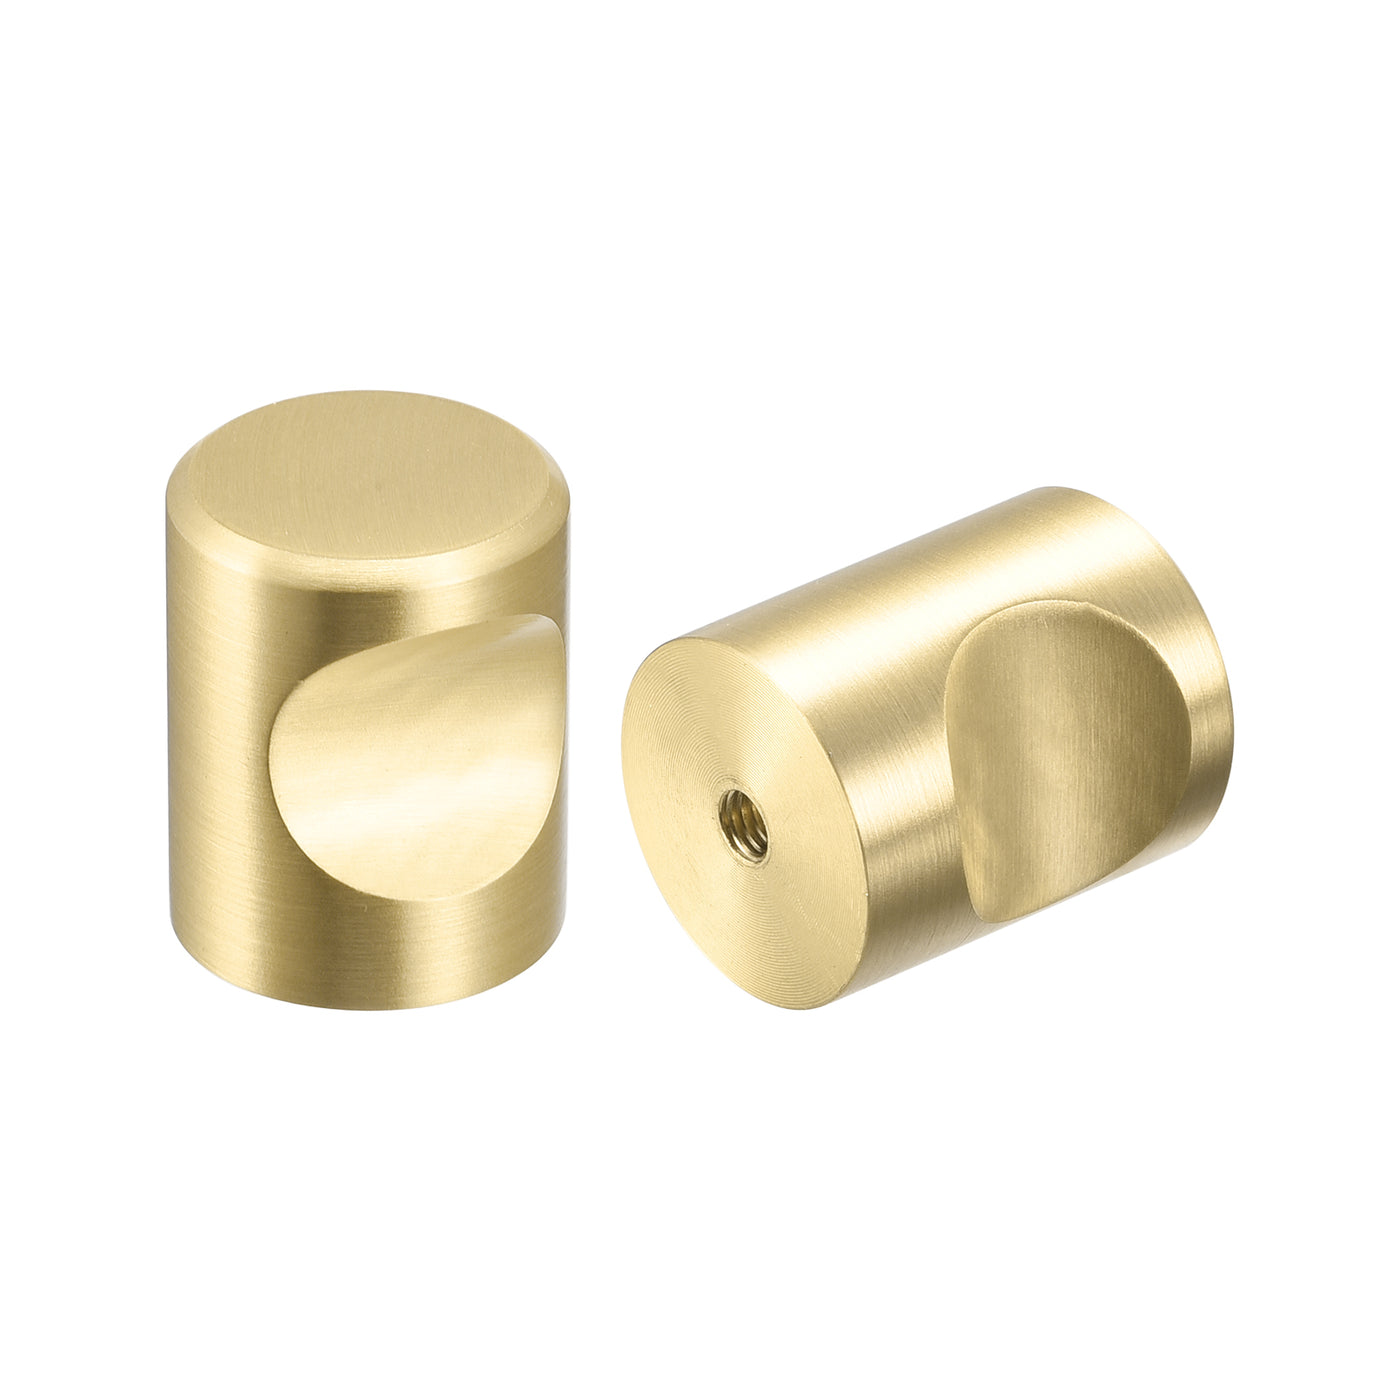 uxcell Uxcell 20x25mm Drawer Knobs, 2pcs Brass Wardrobe Pull Handles, Gold Tone